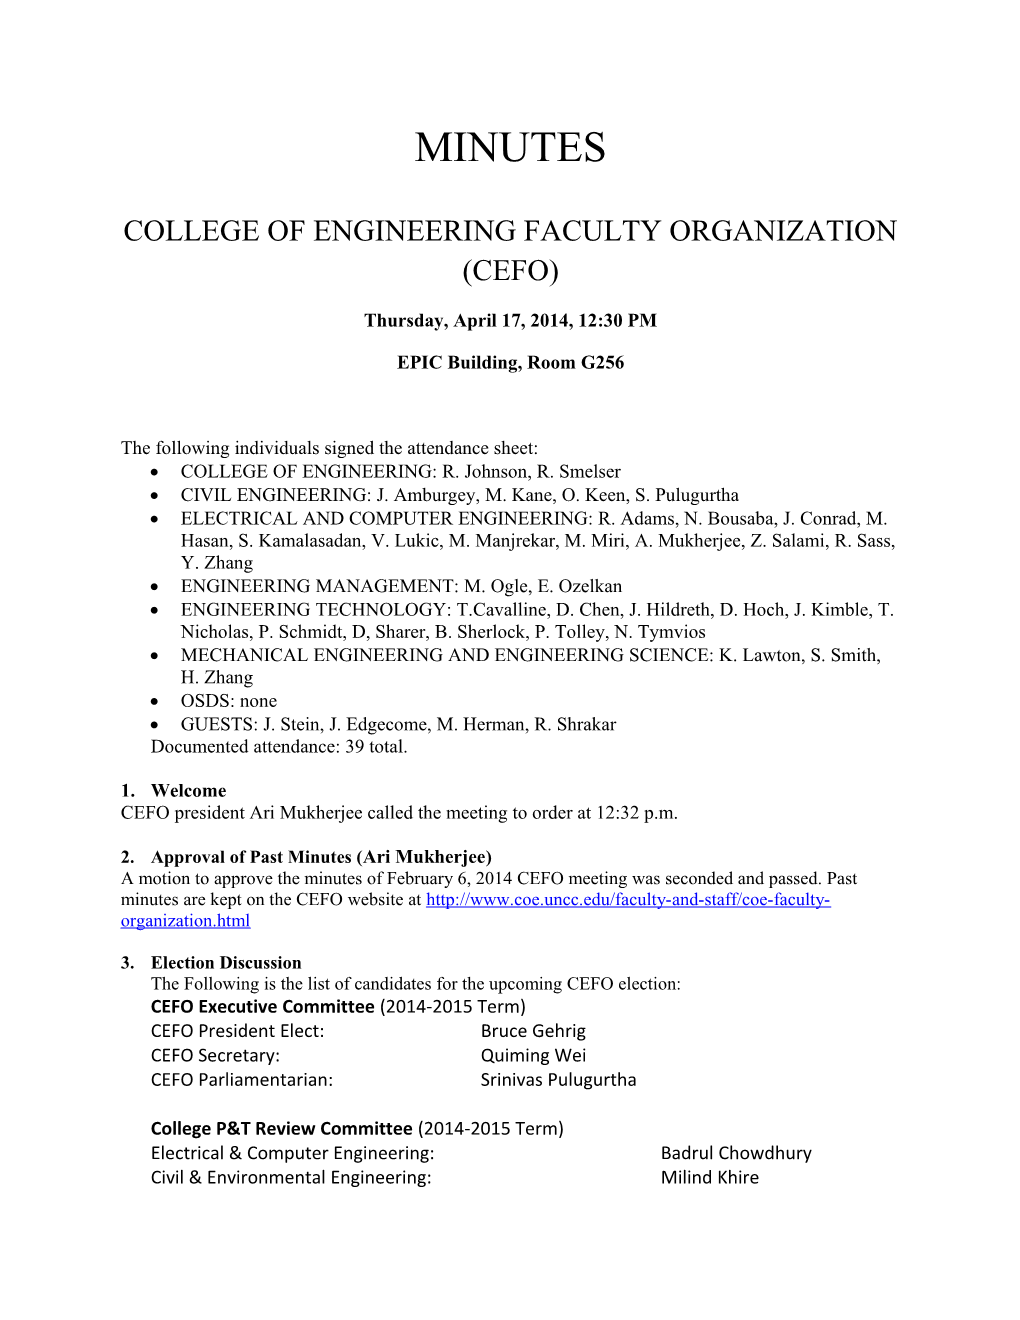 College of Engineering Faculty Organization (Cefo)